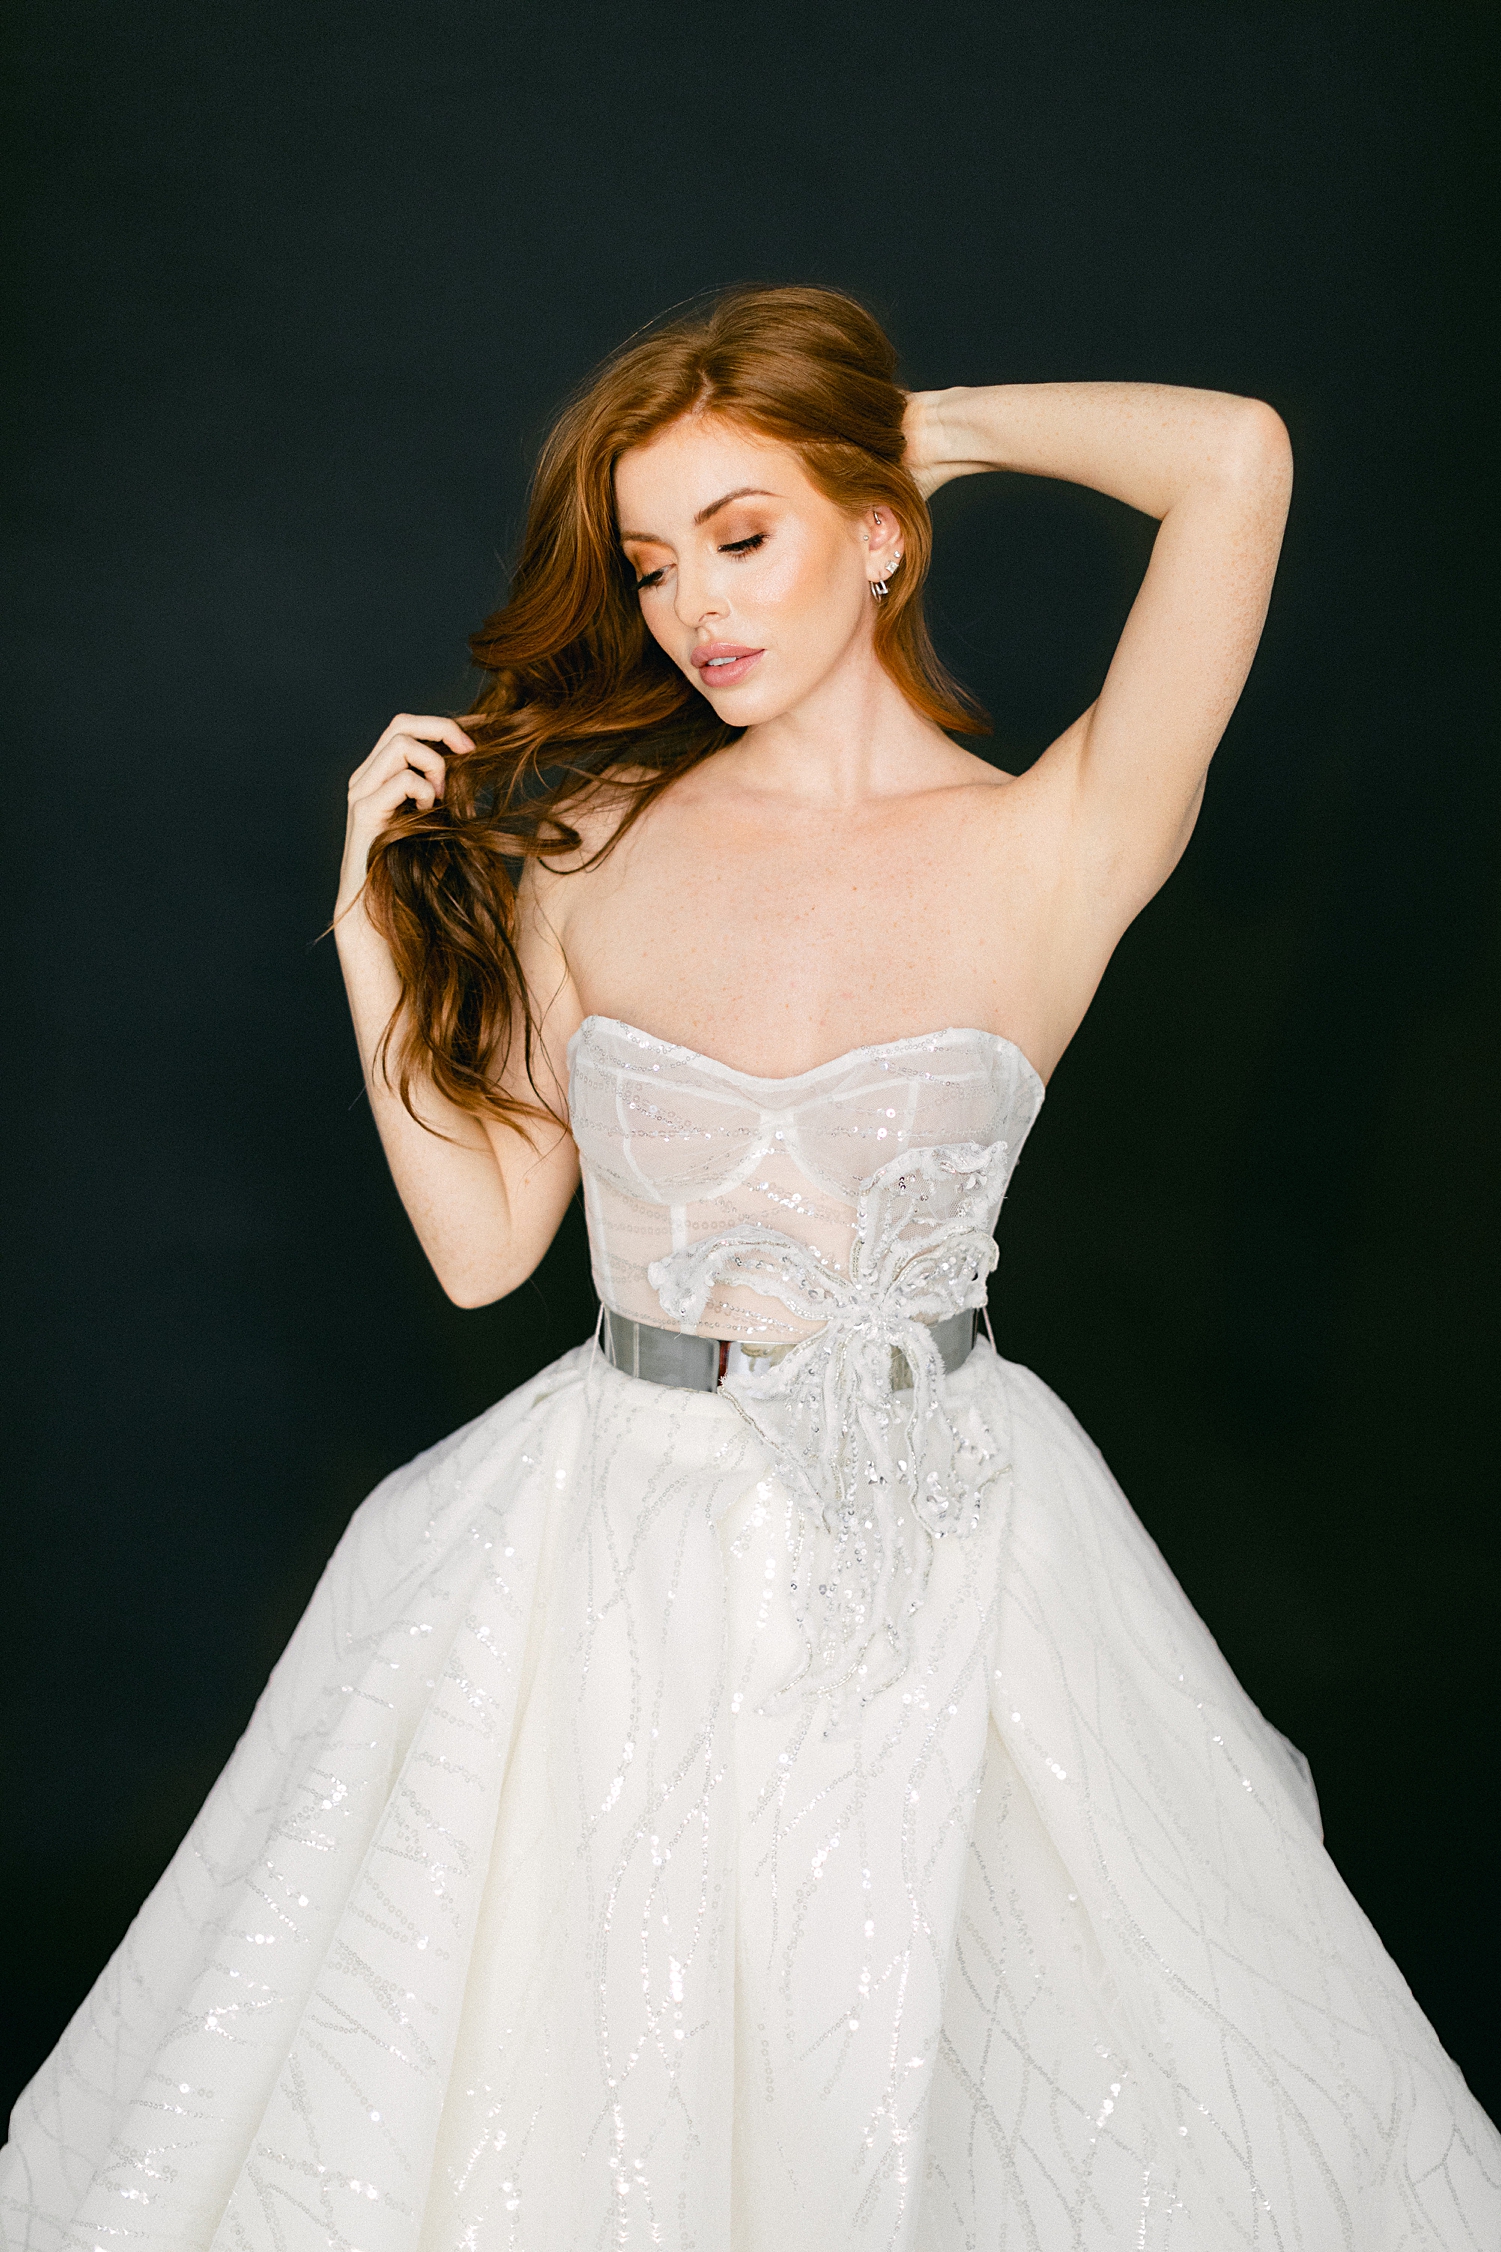 red headed girl with hands in hair wearing sparkling white wedding gown